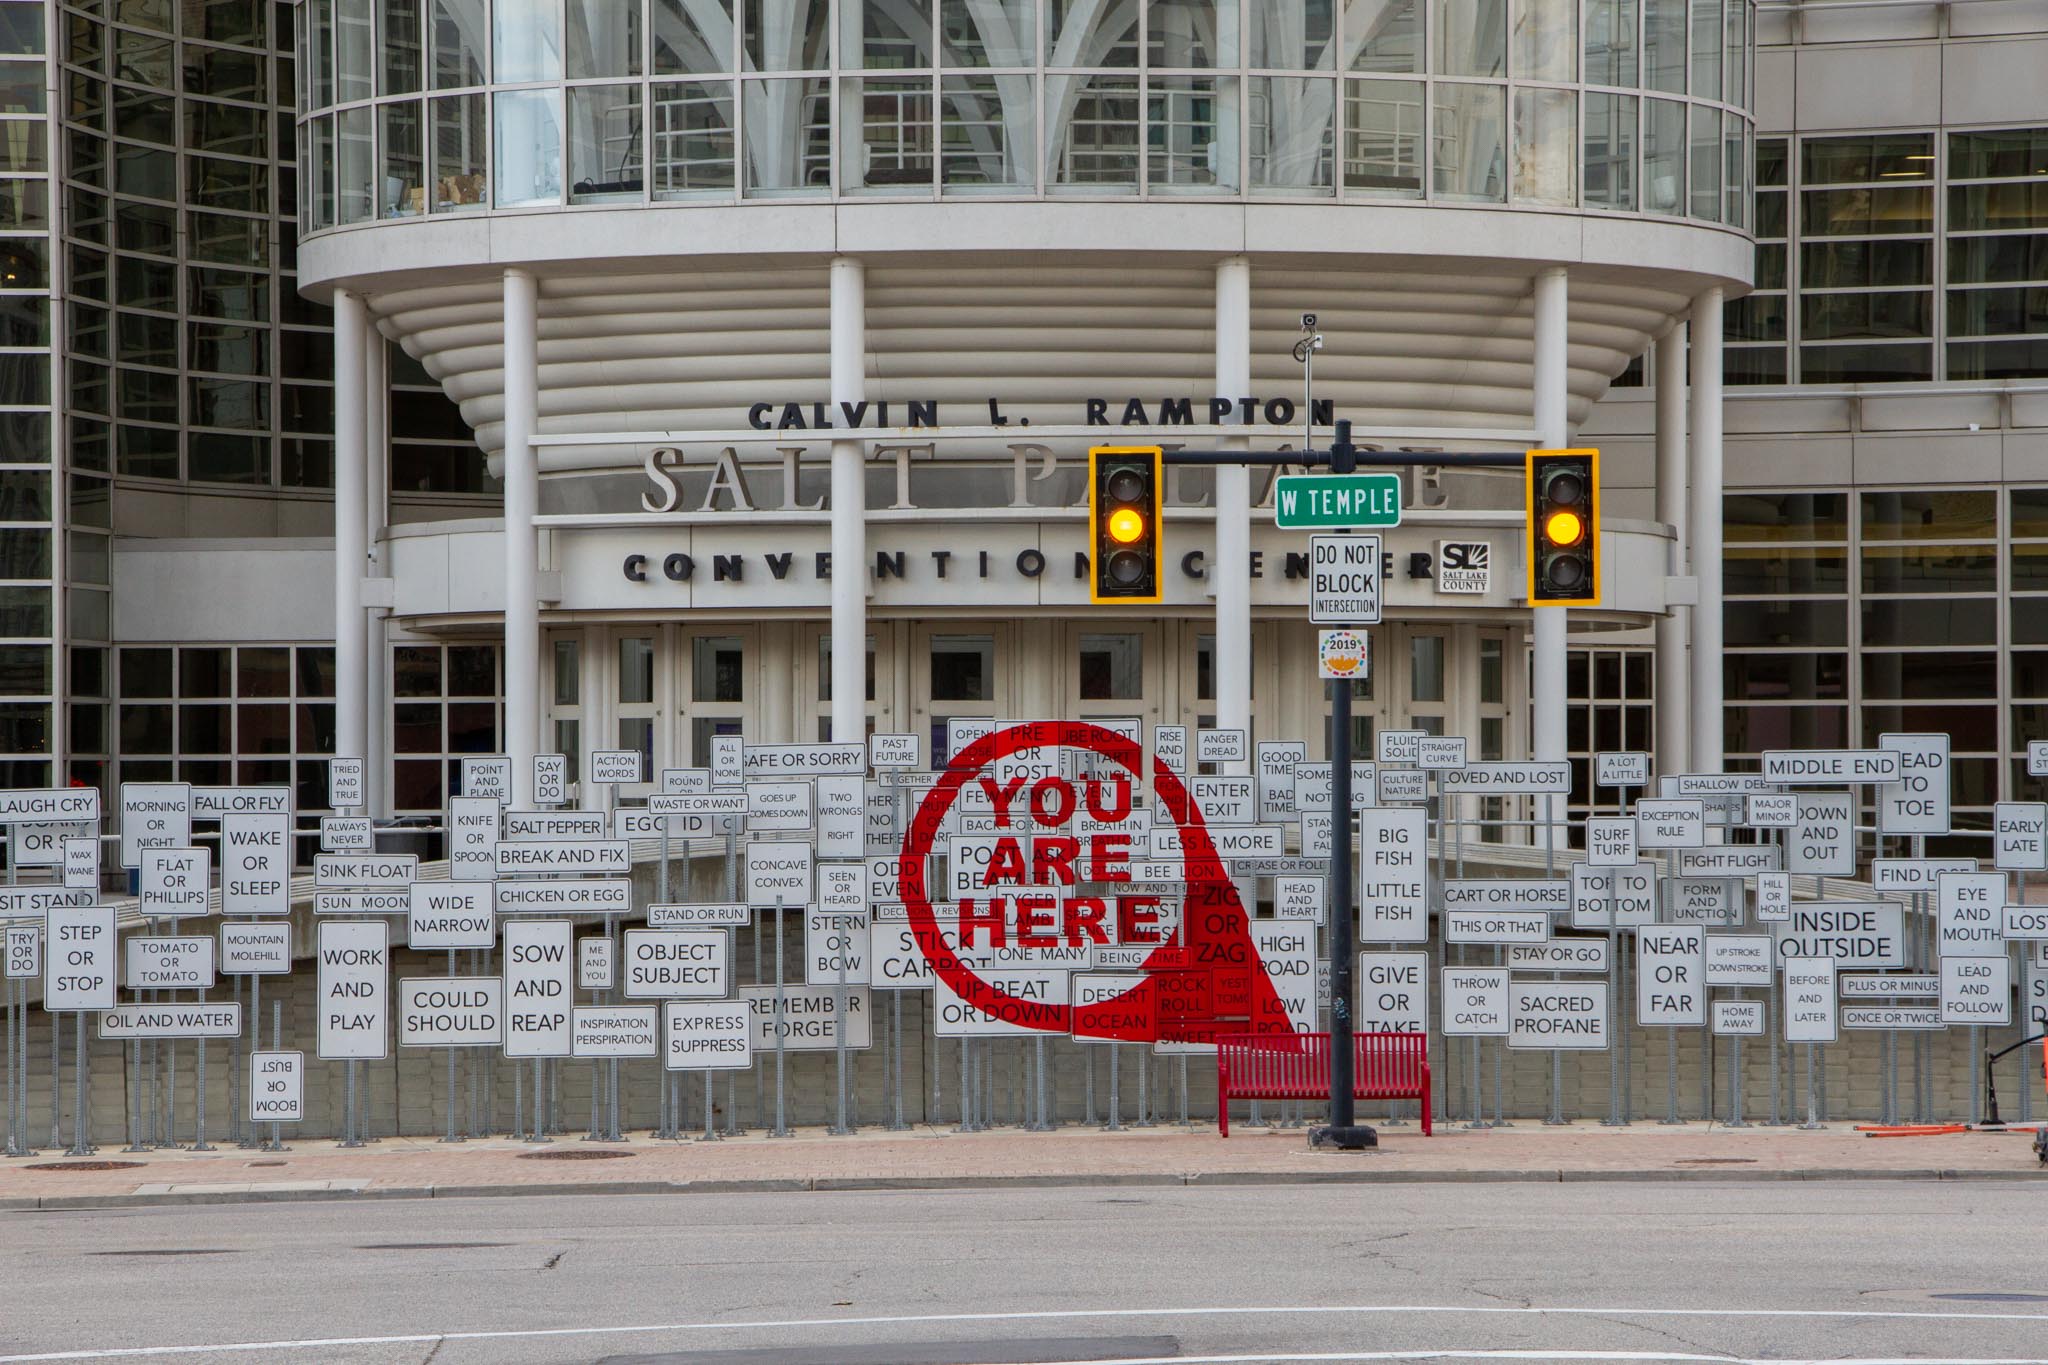 A traffic signal in front of the Salt Palace Convention center and an art exhibit that reads "You Are Here."